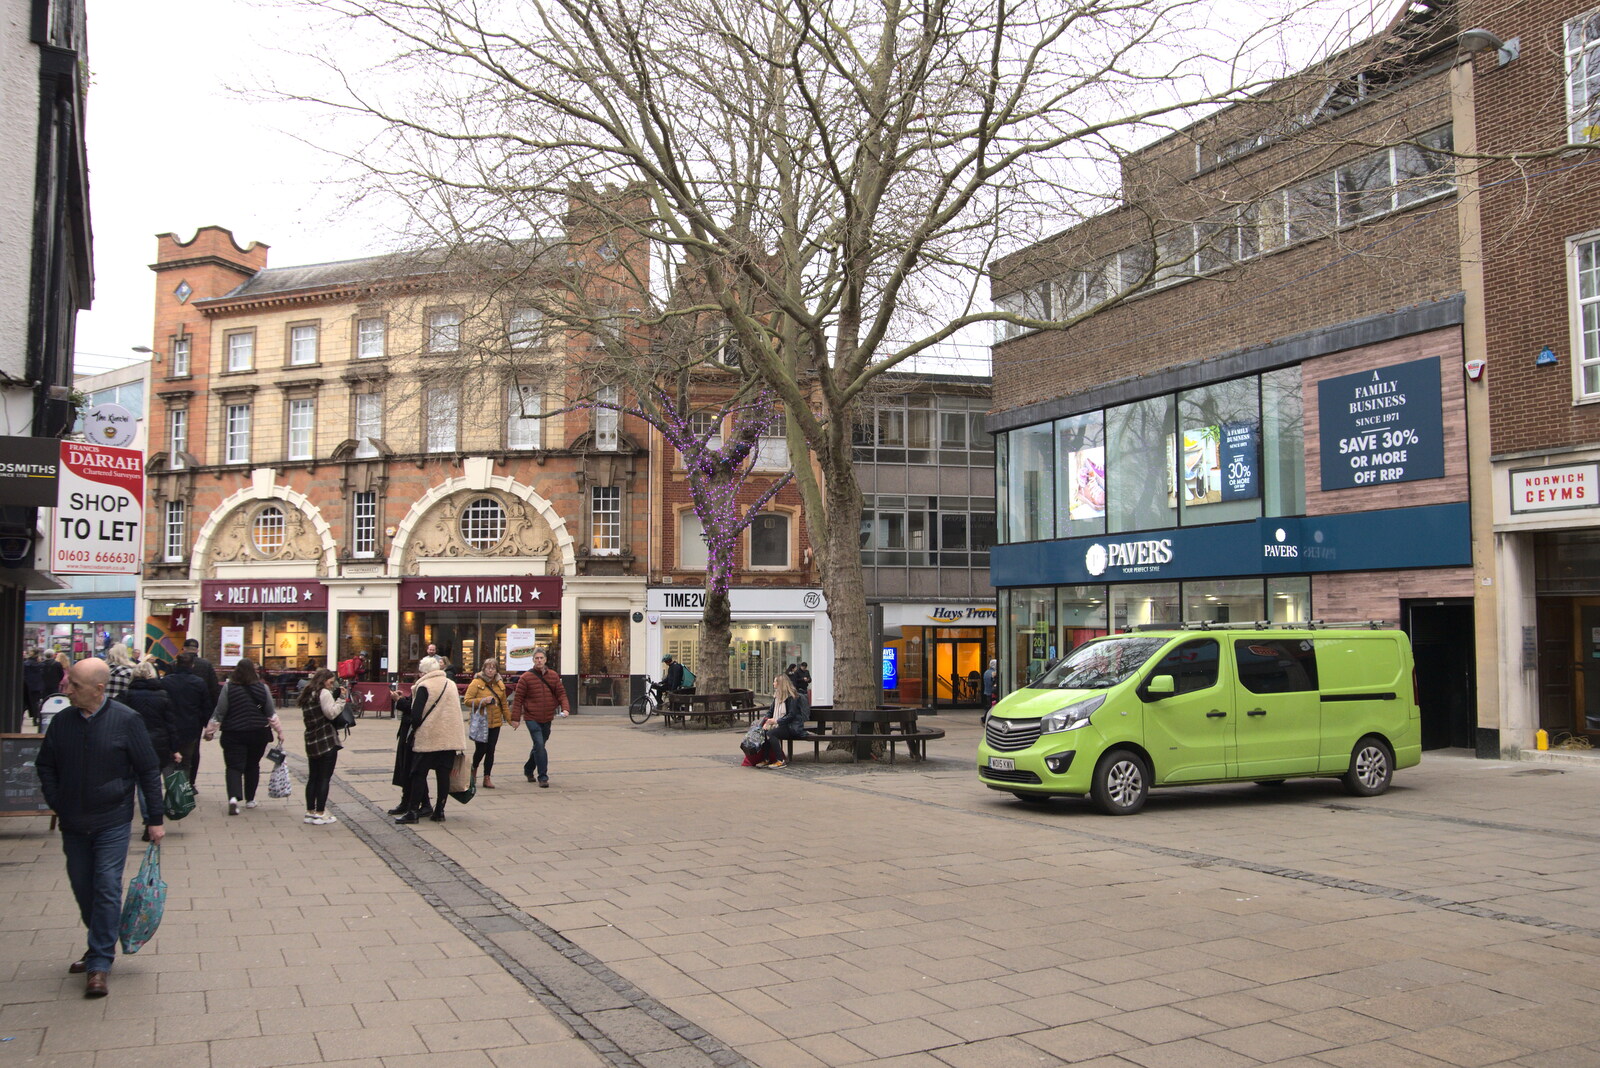 Pret a Manger and CEYMS on Brigg Street from The Lost Pubs of Norwich, Norfolk - 13th February 2022